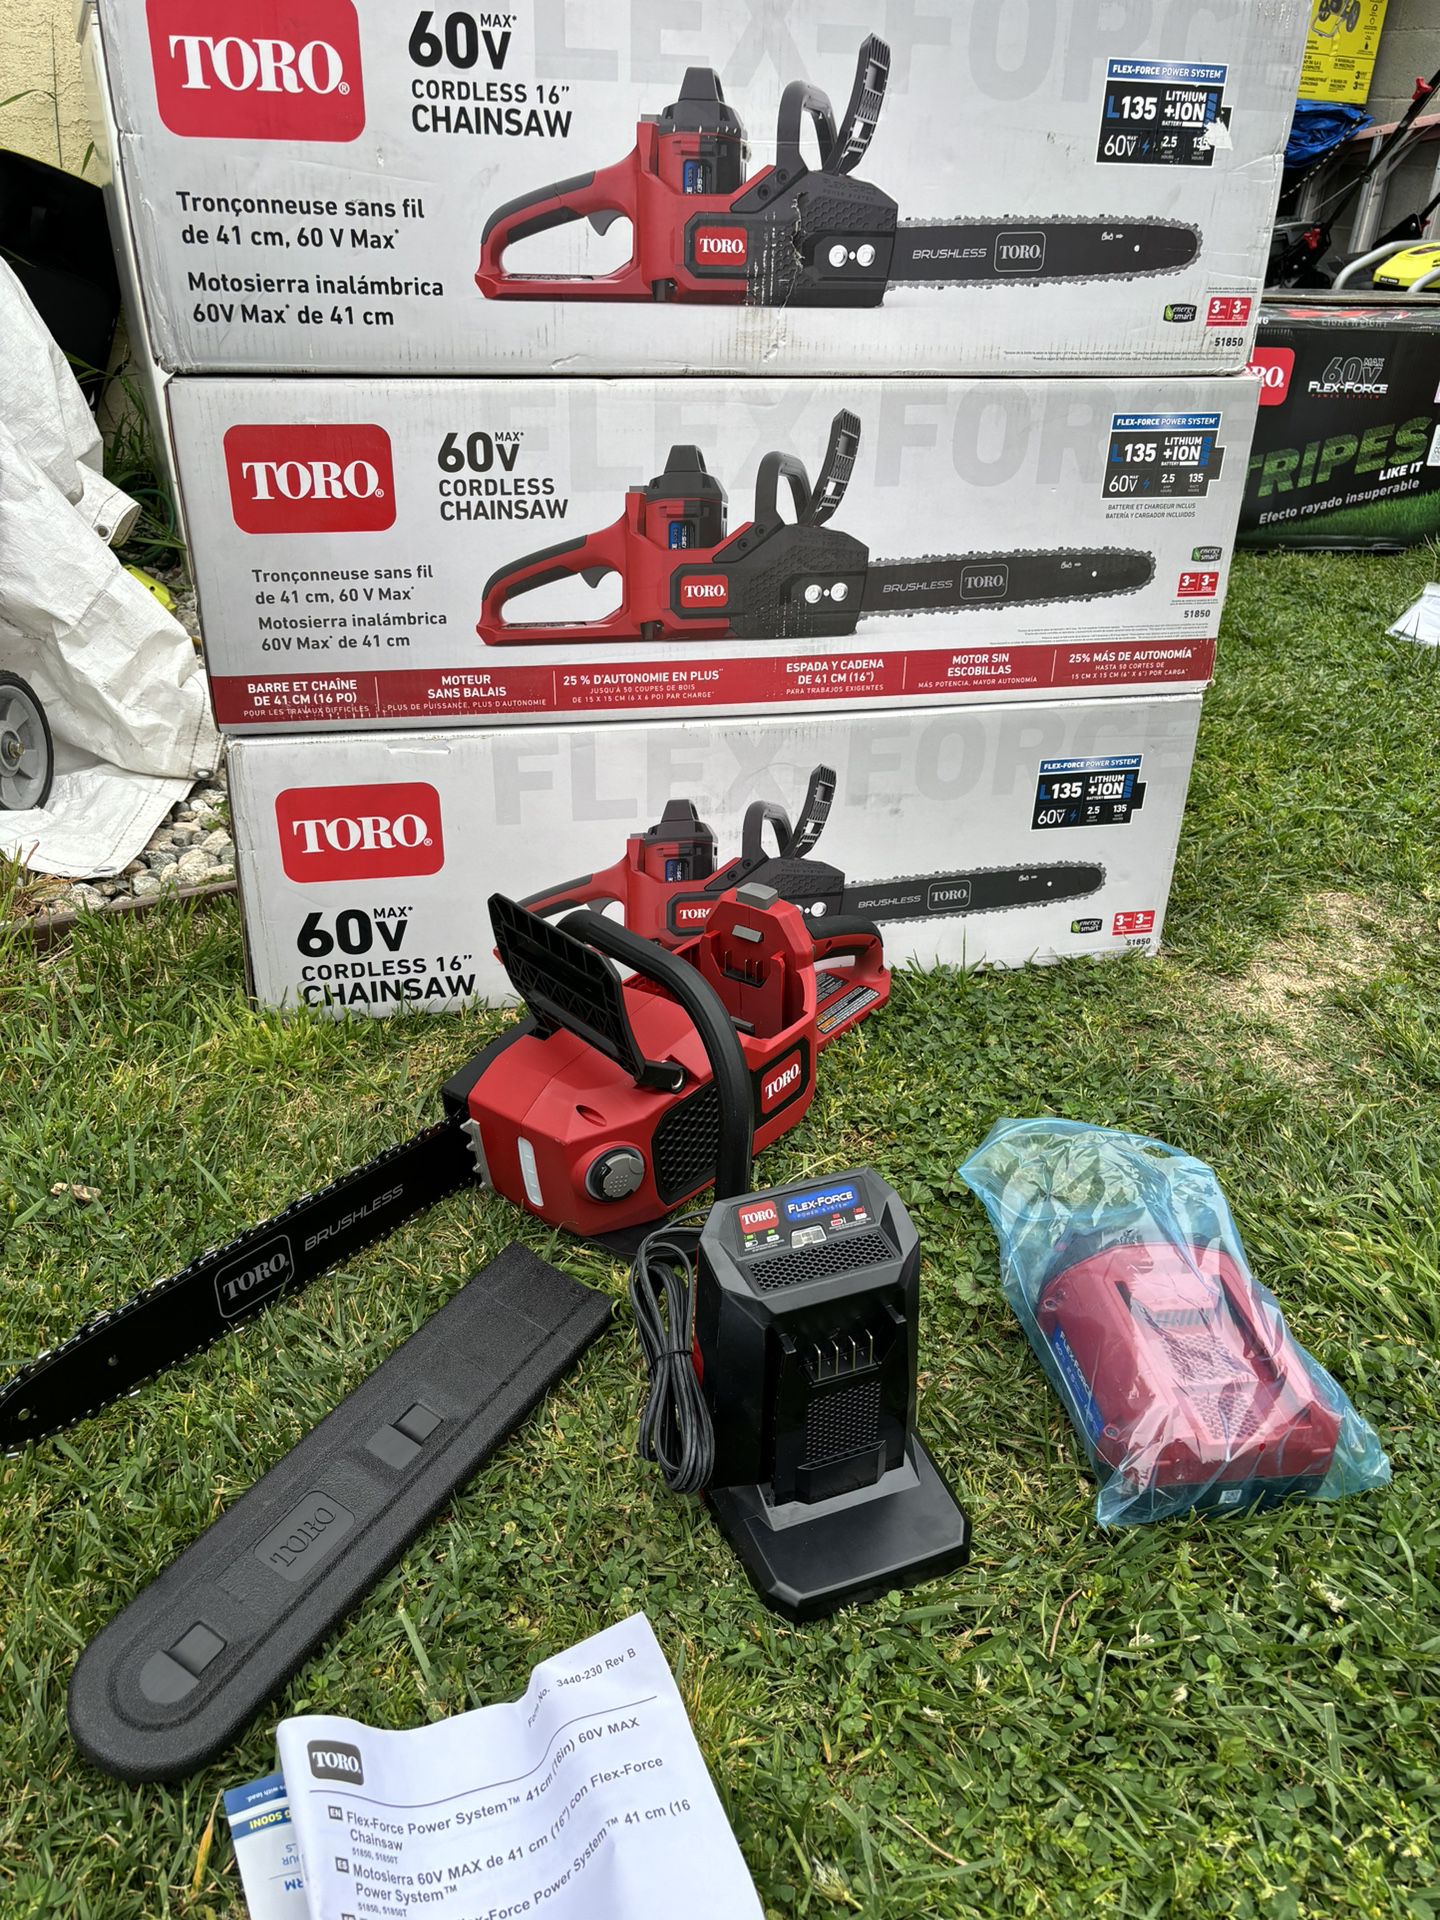 Toro Flex-Force 60-Volt Max 16-Inch Lithium-Ion Electric Chainsaw with 3-Phase Brushless RunSmart Motor, 2.0 Ah Battery, and Charger, Red